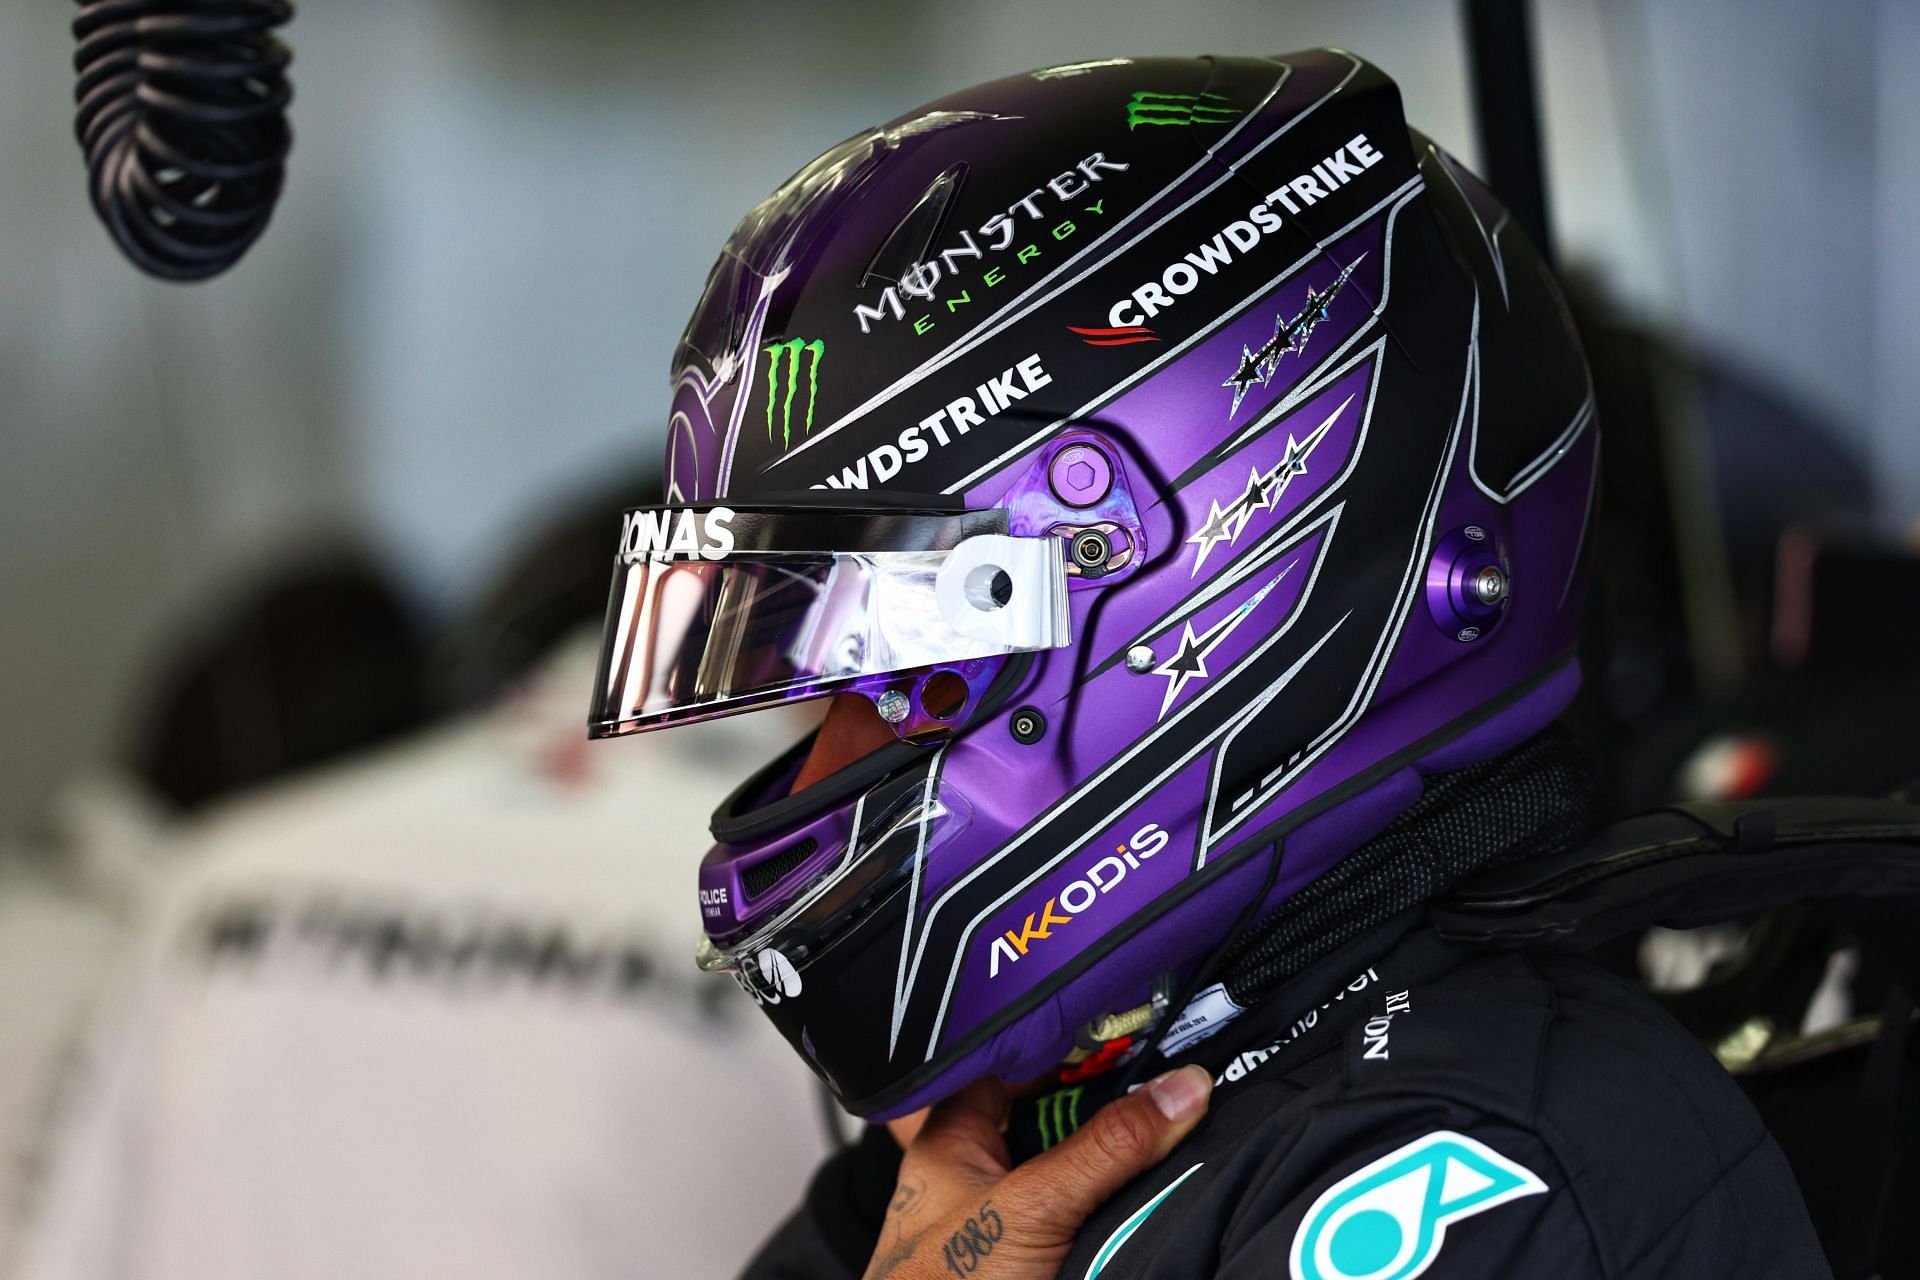 Lewis Hamilton in the Mercedes garage during Day 3 of pre-season testing in Bahrain (Photo by Lars Baron/Getty Images)